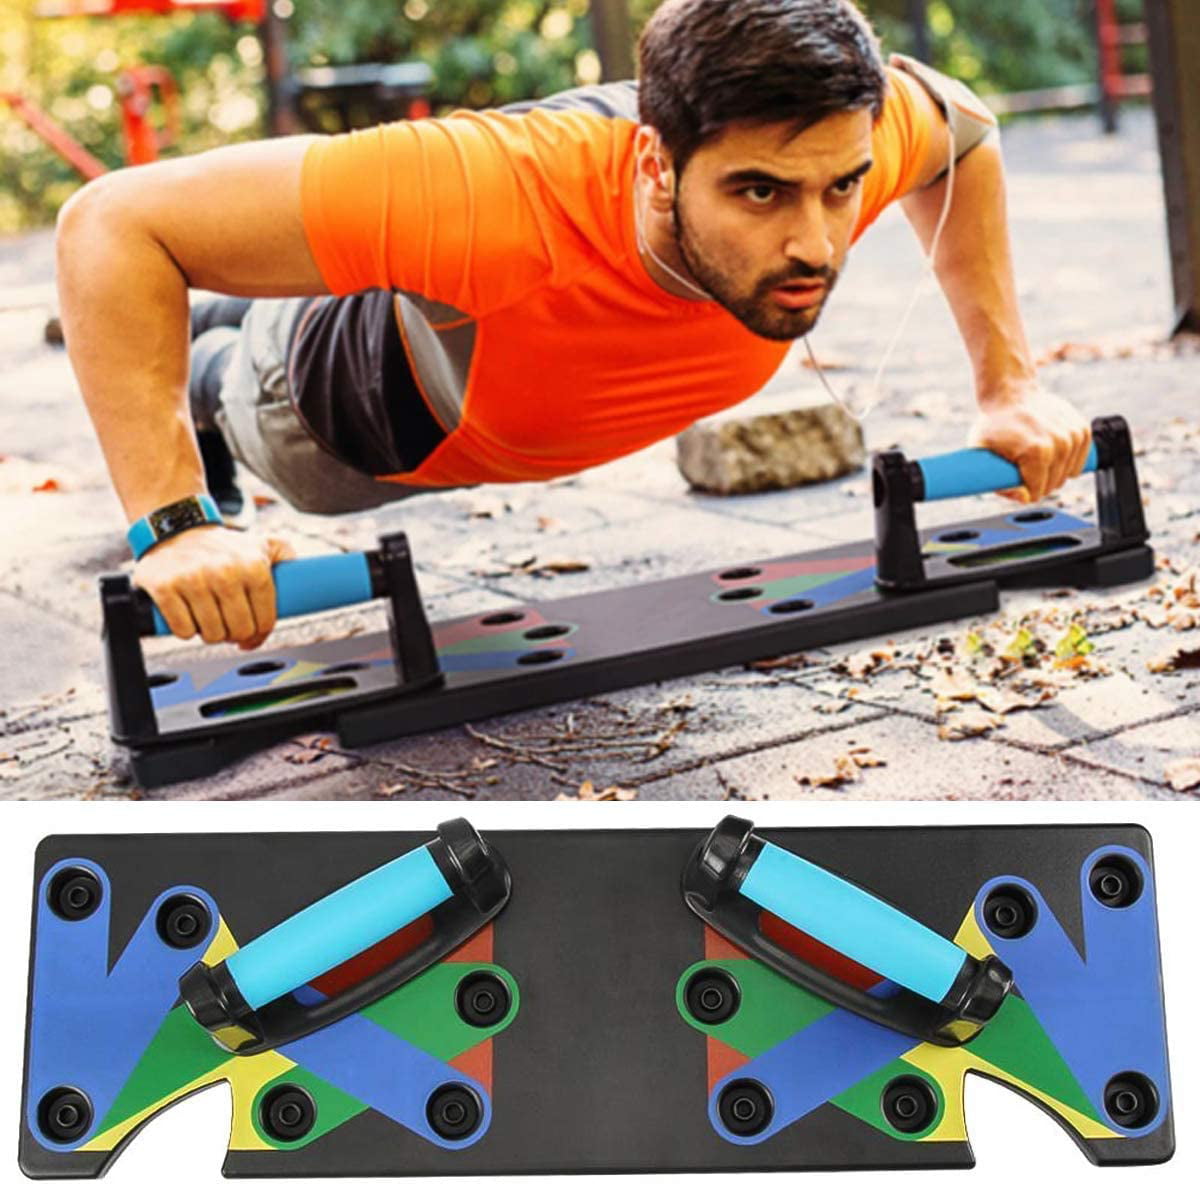 9 in 1 Push Up Rack Board Fitness Workout Train Gym Muscle Exercise Stand System